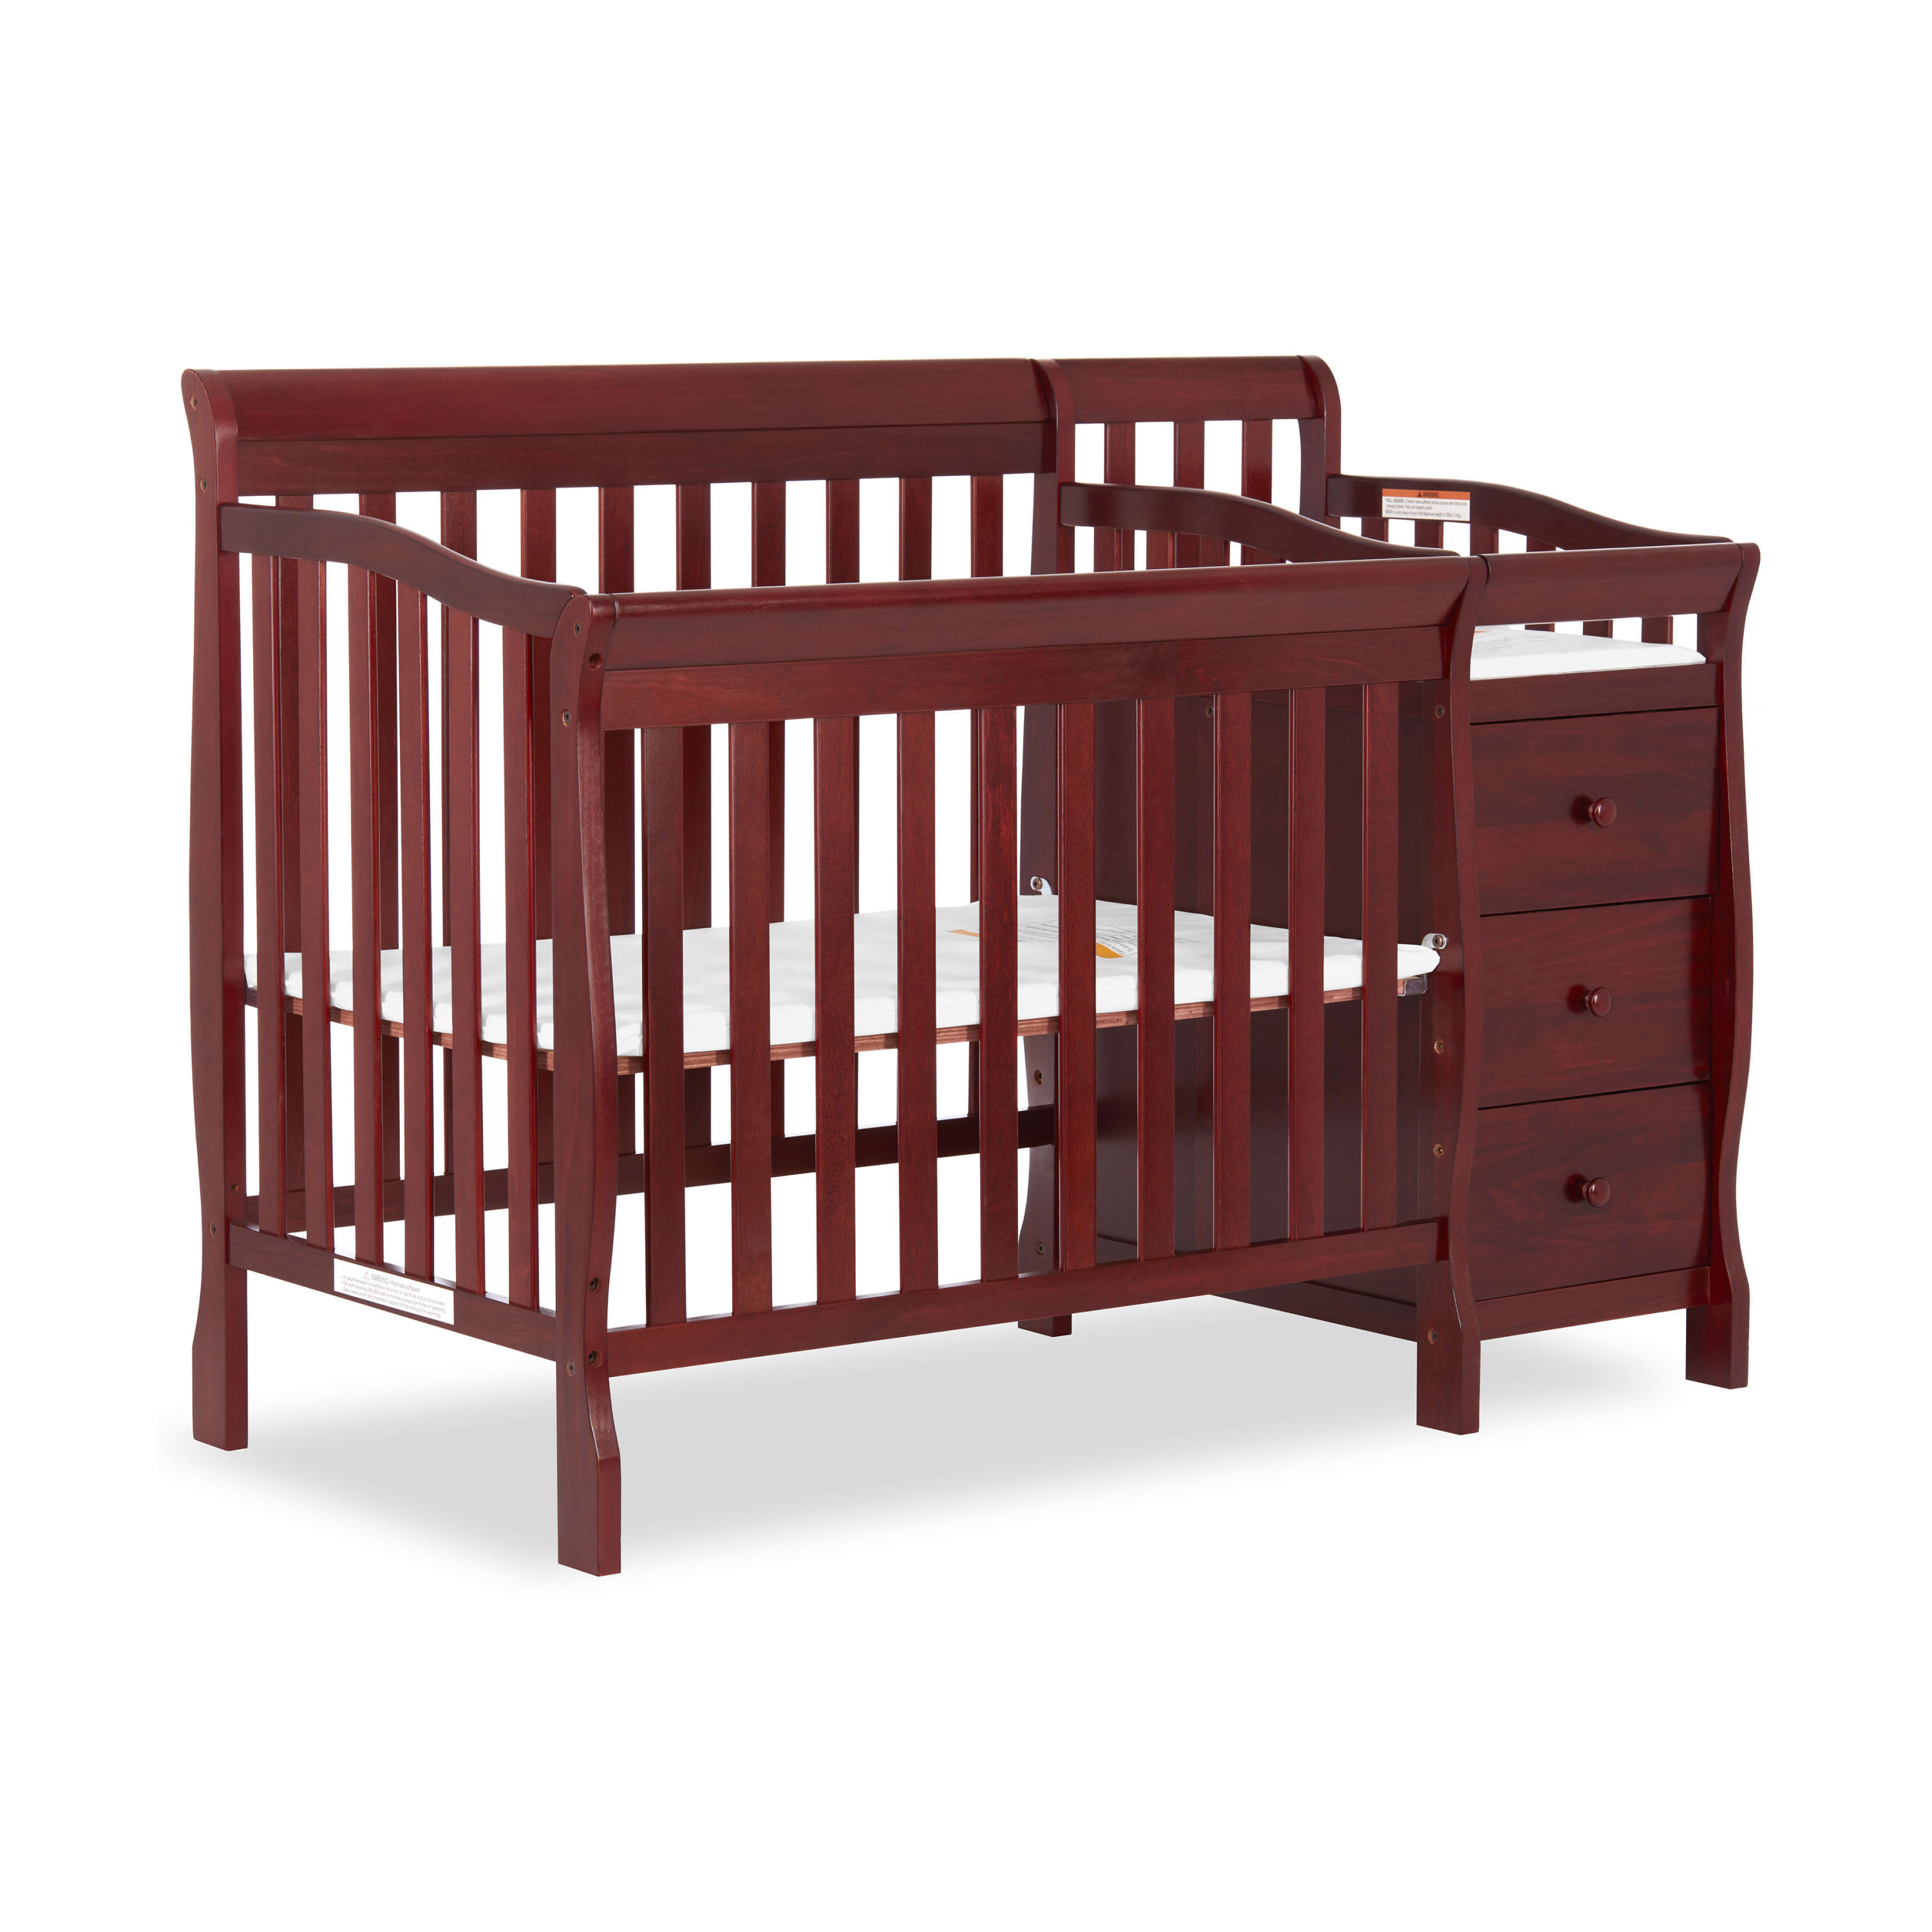 Dream On Me Jayden 4-in-1 Convertible Mini Crib and Changer, Cherry - image 1 of 11